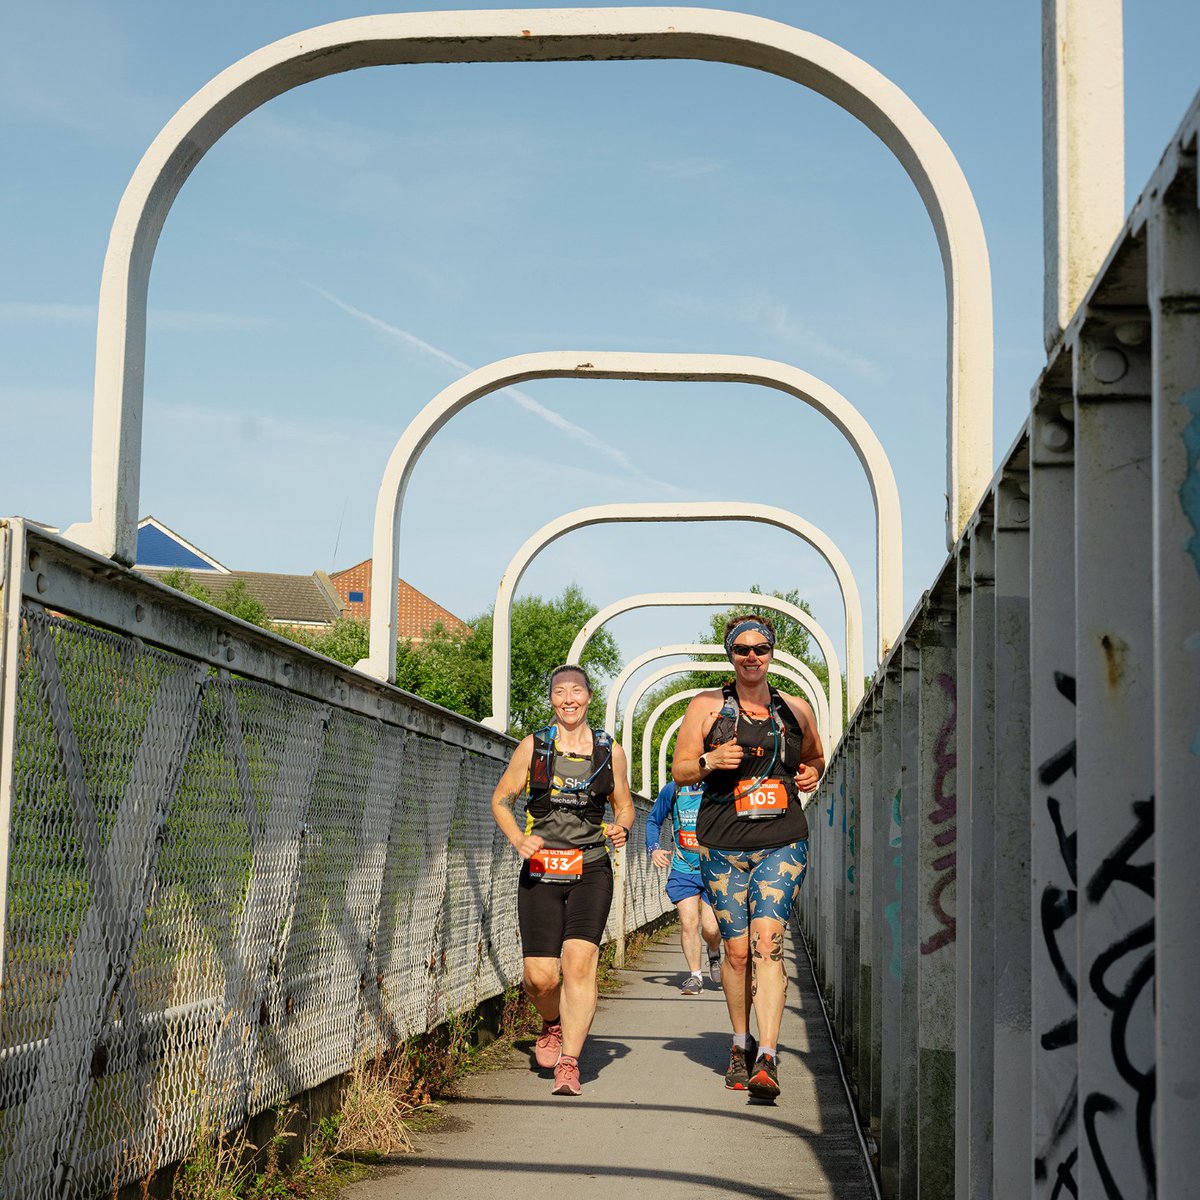 Run or walk an all-terrain route celebrating the North East, from its industrial heritage to today's renewal and reinvention 👉 brnw.ch/21wHsRL